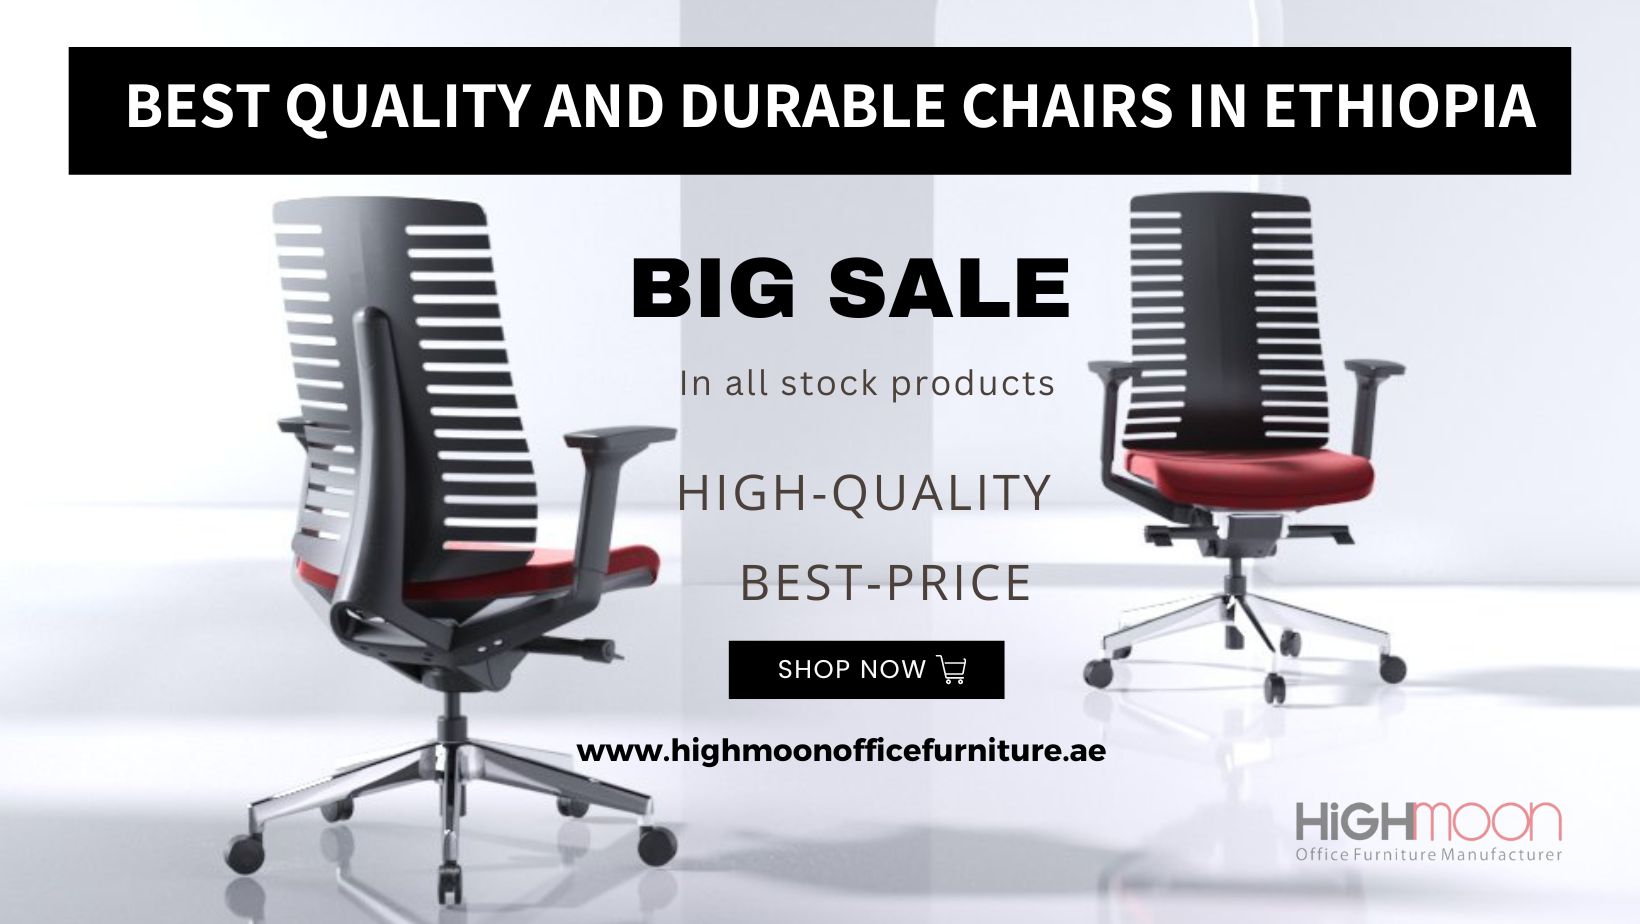 Best Quality and Durable Chairs in Ethiopia